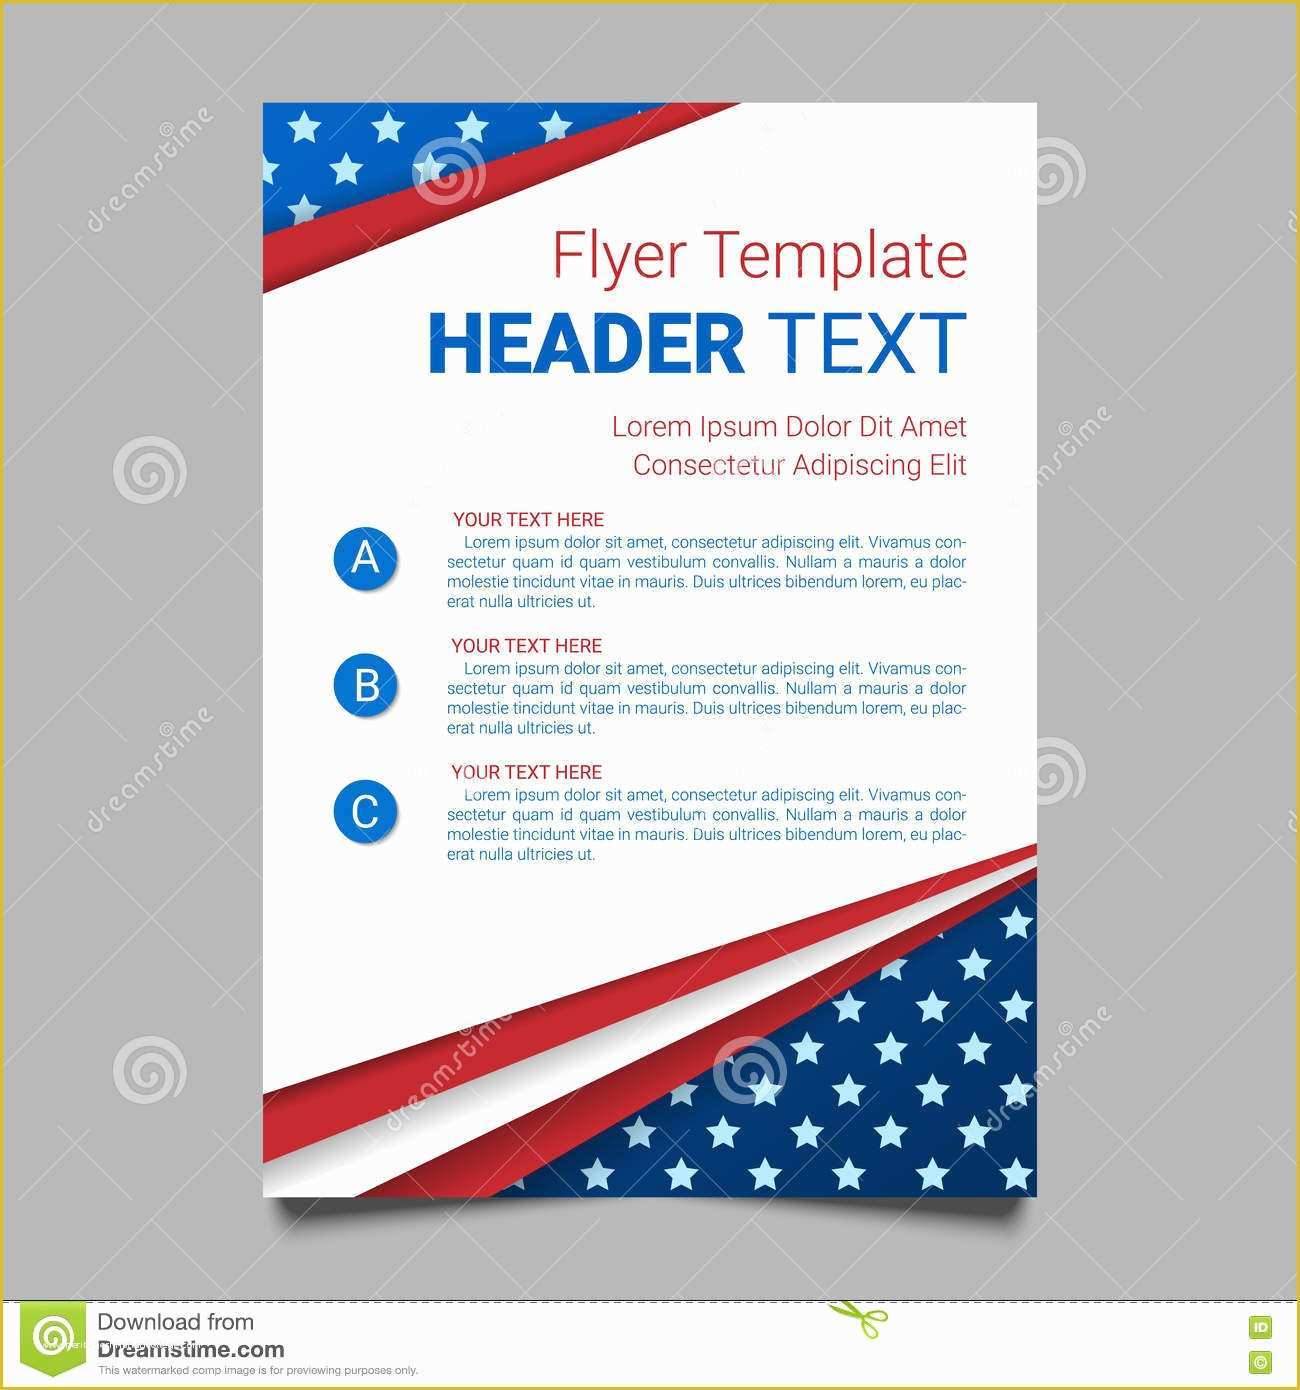 Free American Flag Flyer Template Of Usa Patriotic Background Vector Illustration with Text